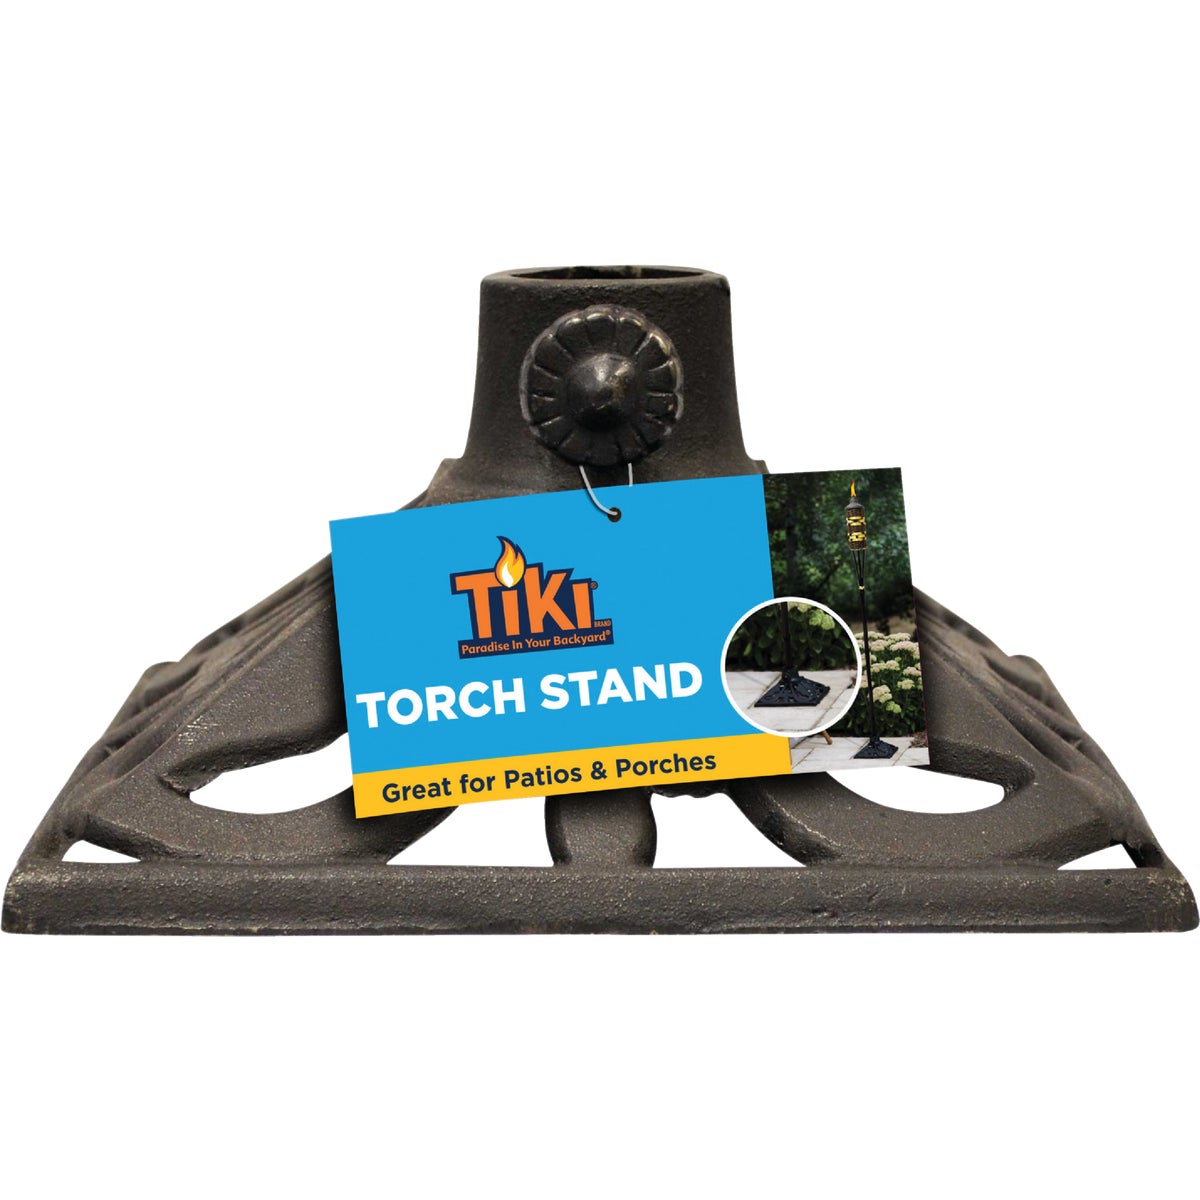 Item 800024, Durable and stable cast iron torch stand is ideal for decks, balconies, 